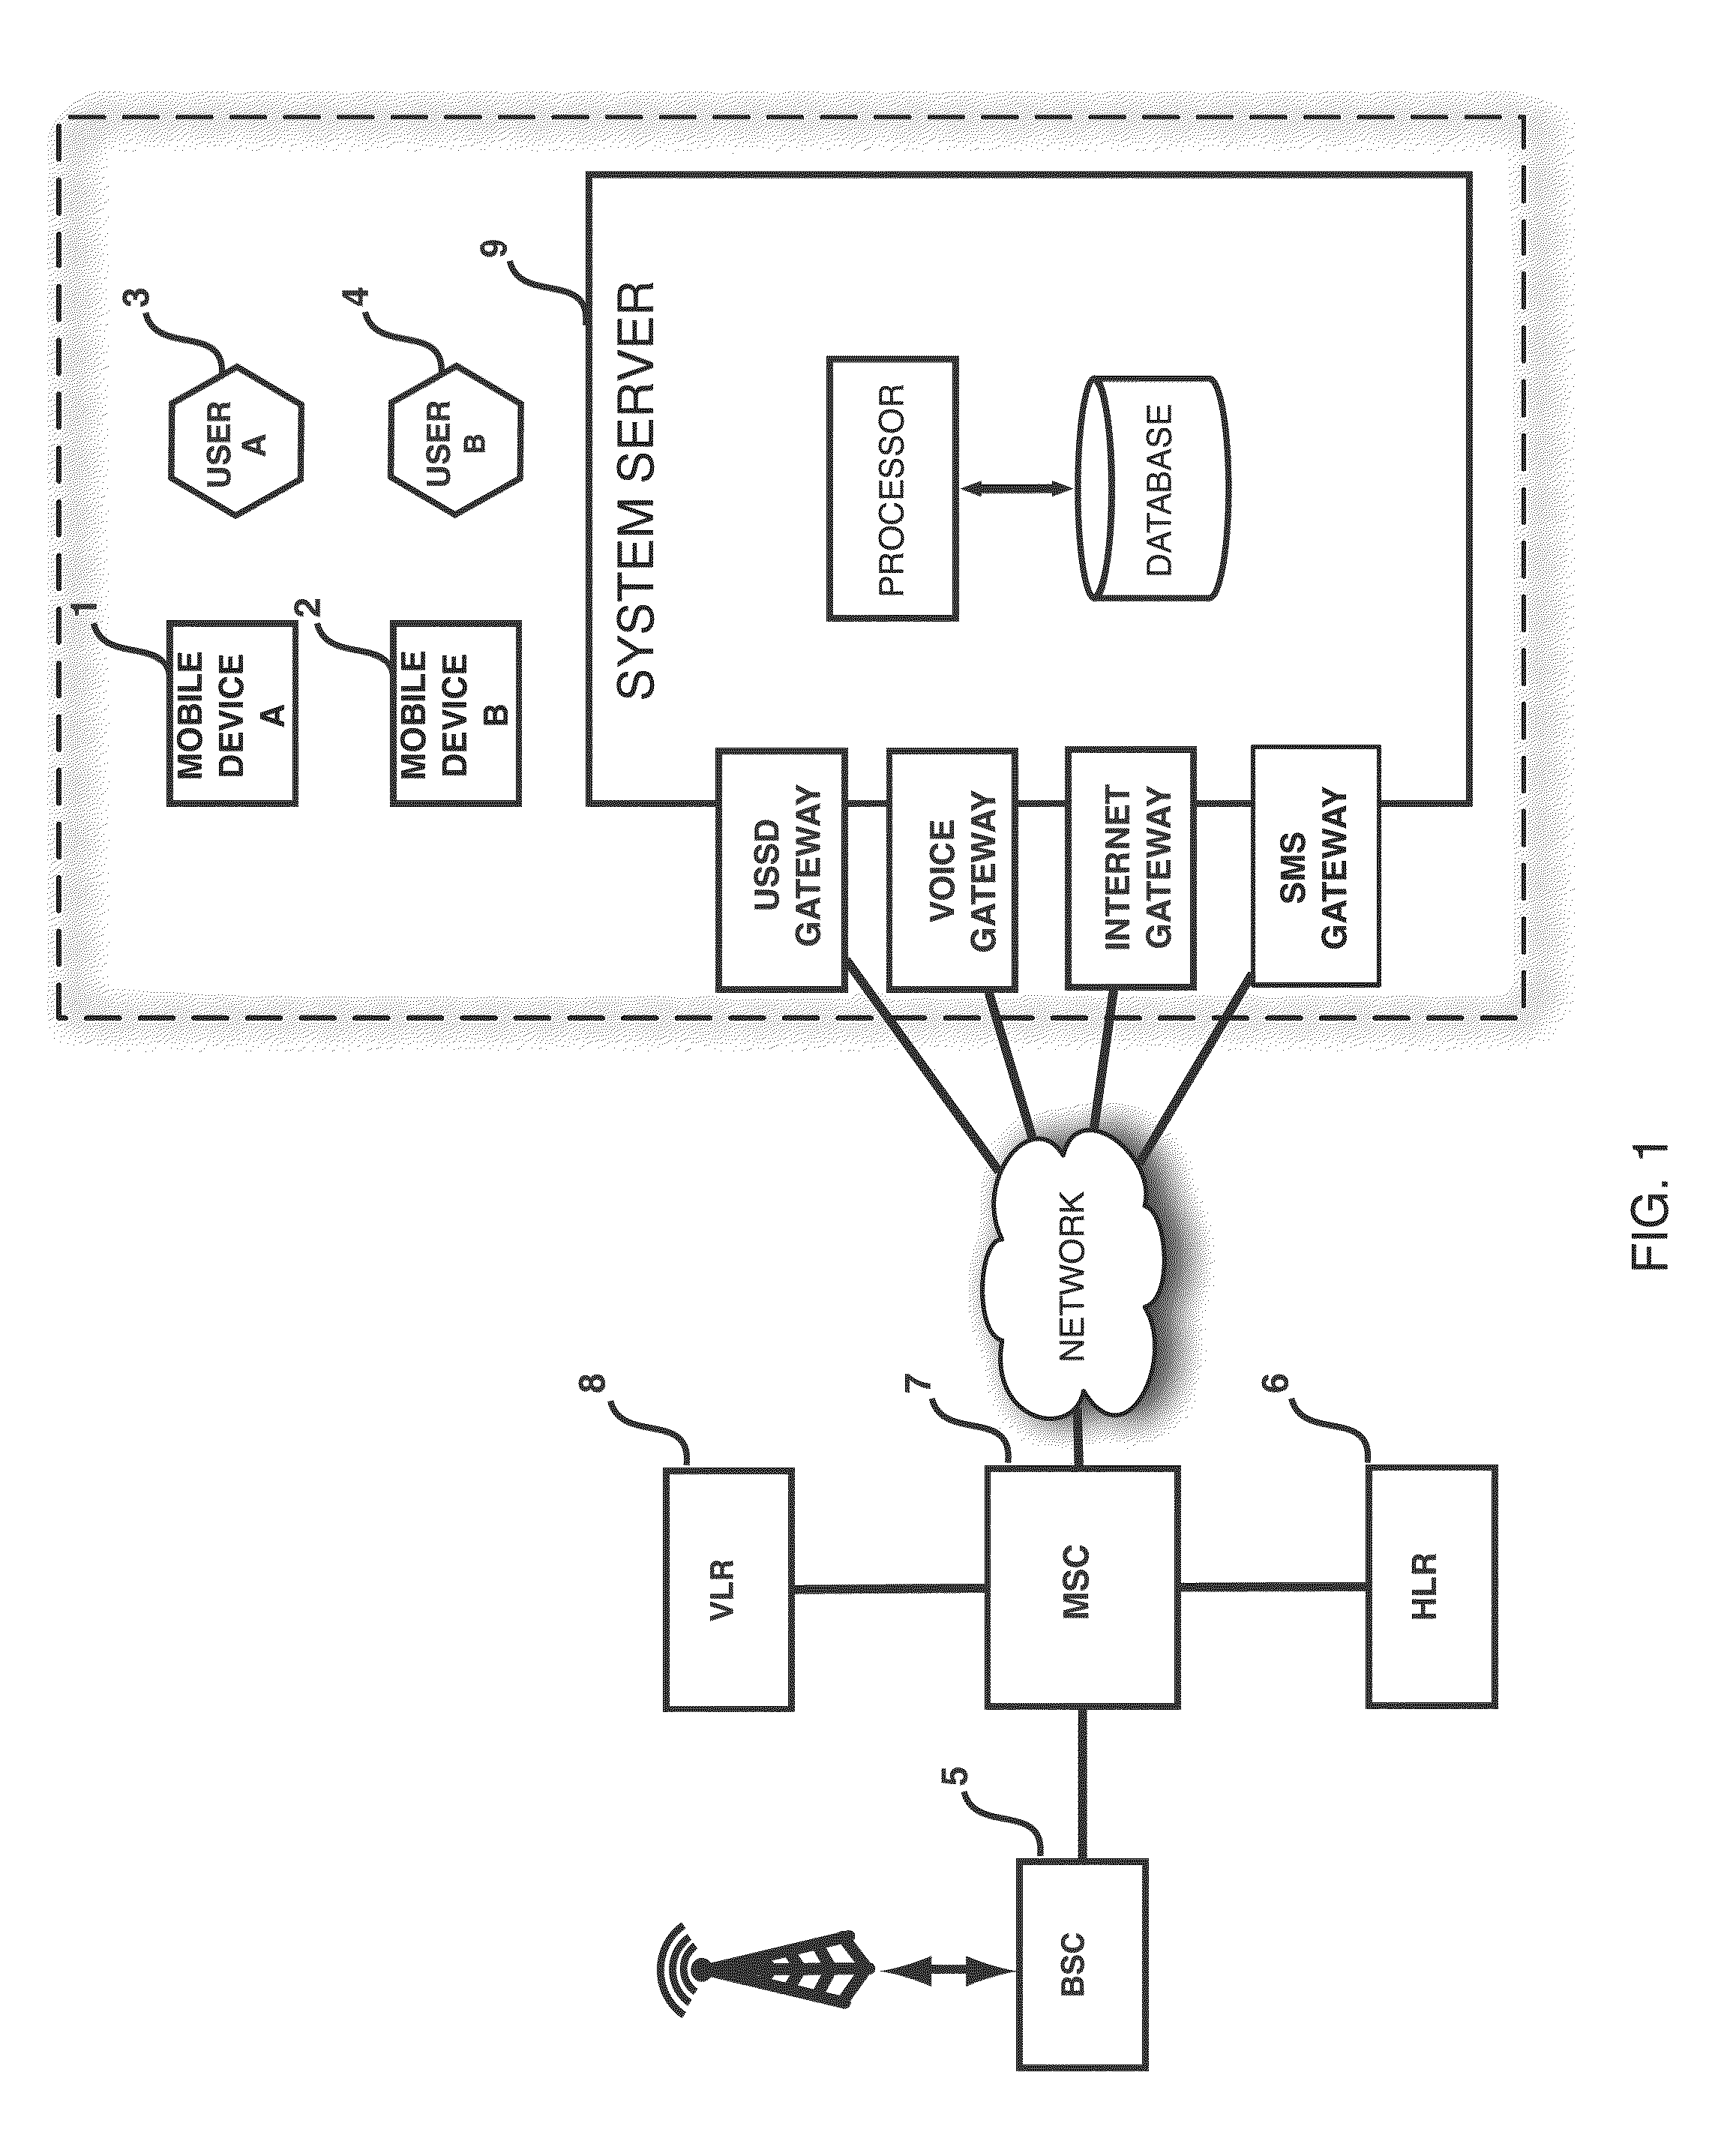 Method and system for enabling usage of mobile telephone services on a donor device